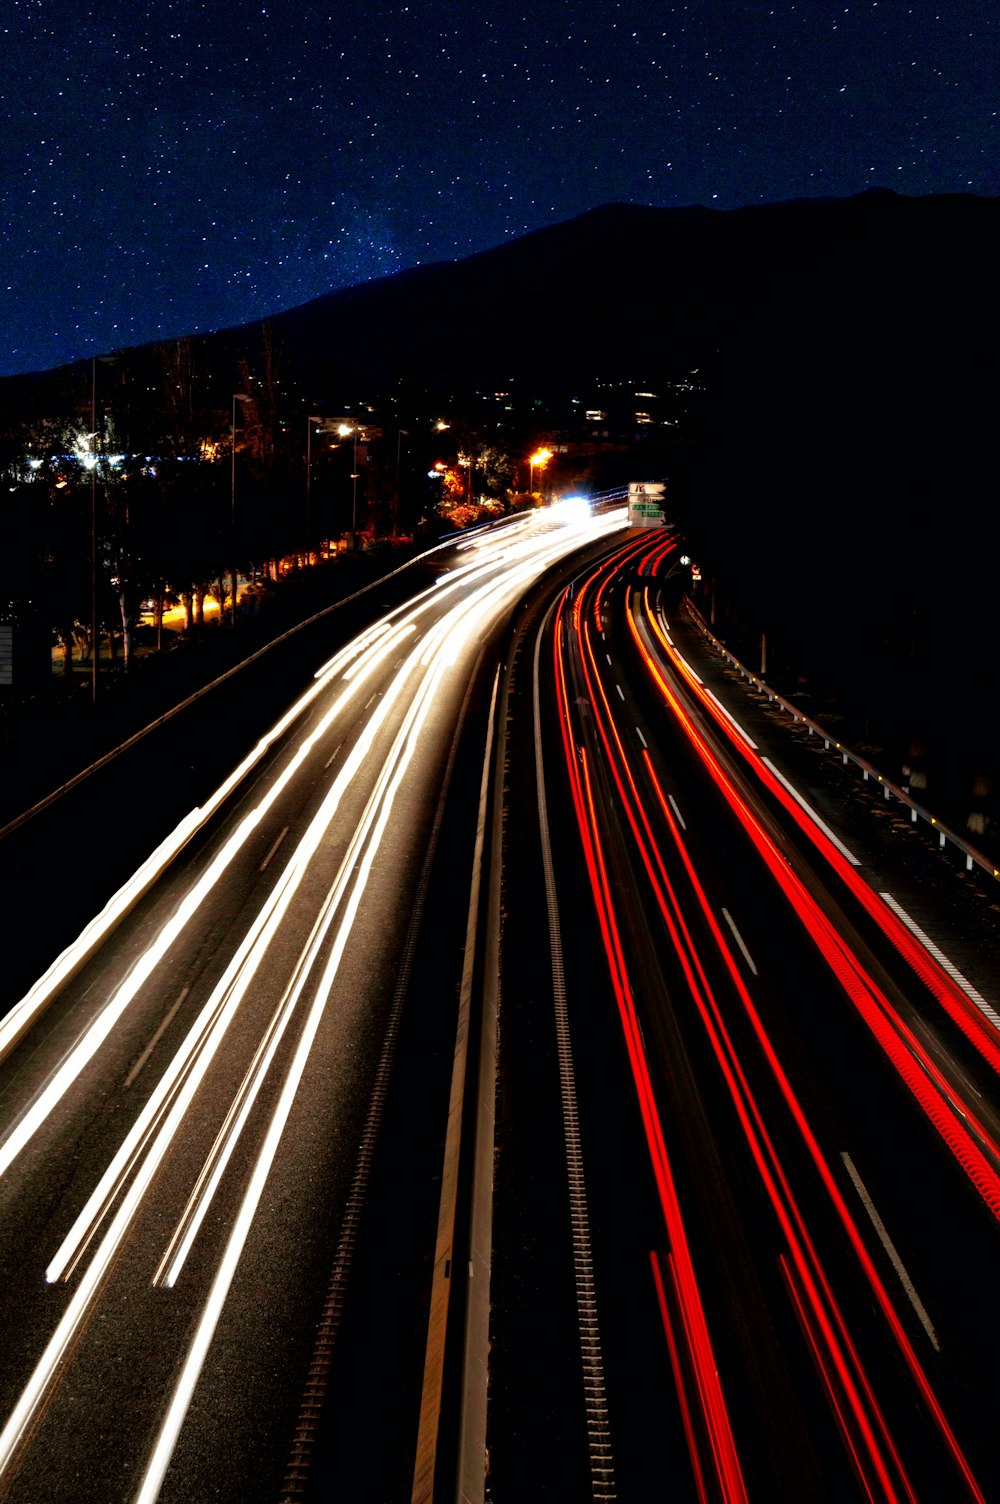 timelapse photo of vehicles on road during nighttime